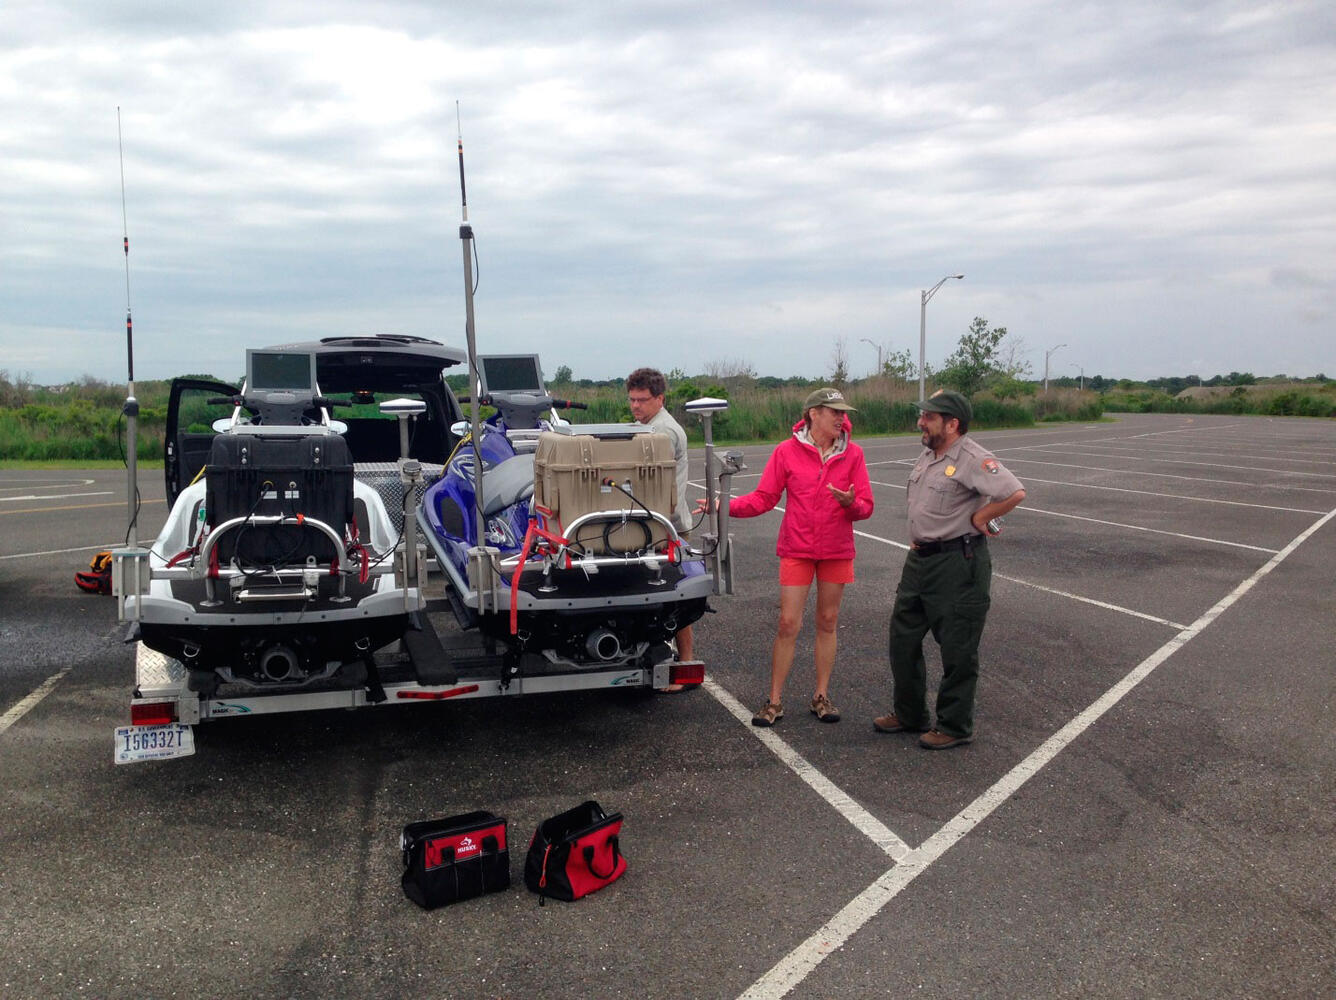 Three people standing in a parking lot near a trailer with two jet skis on it.